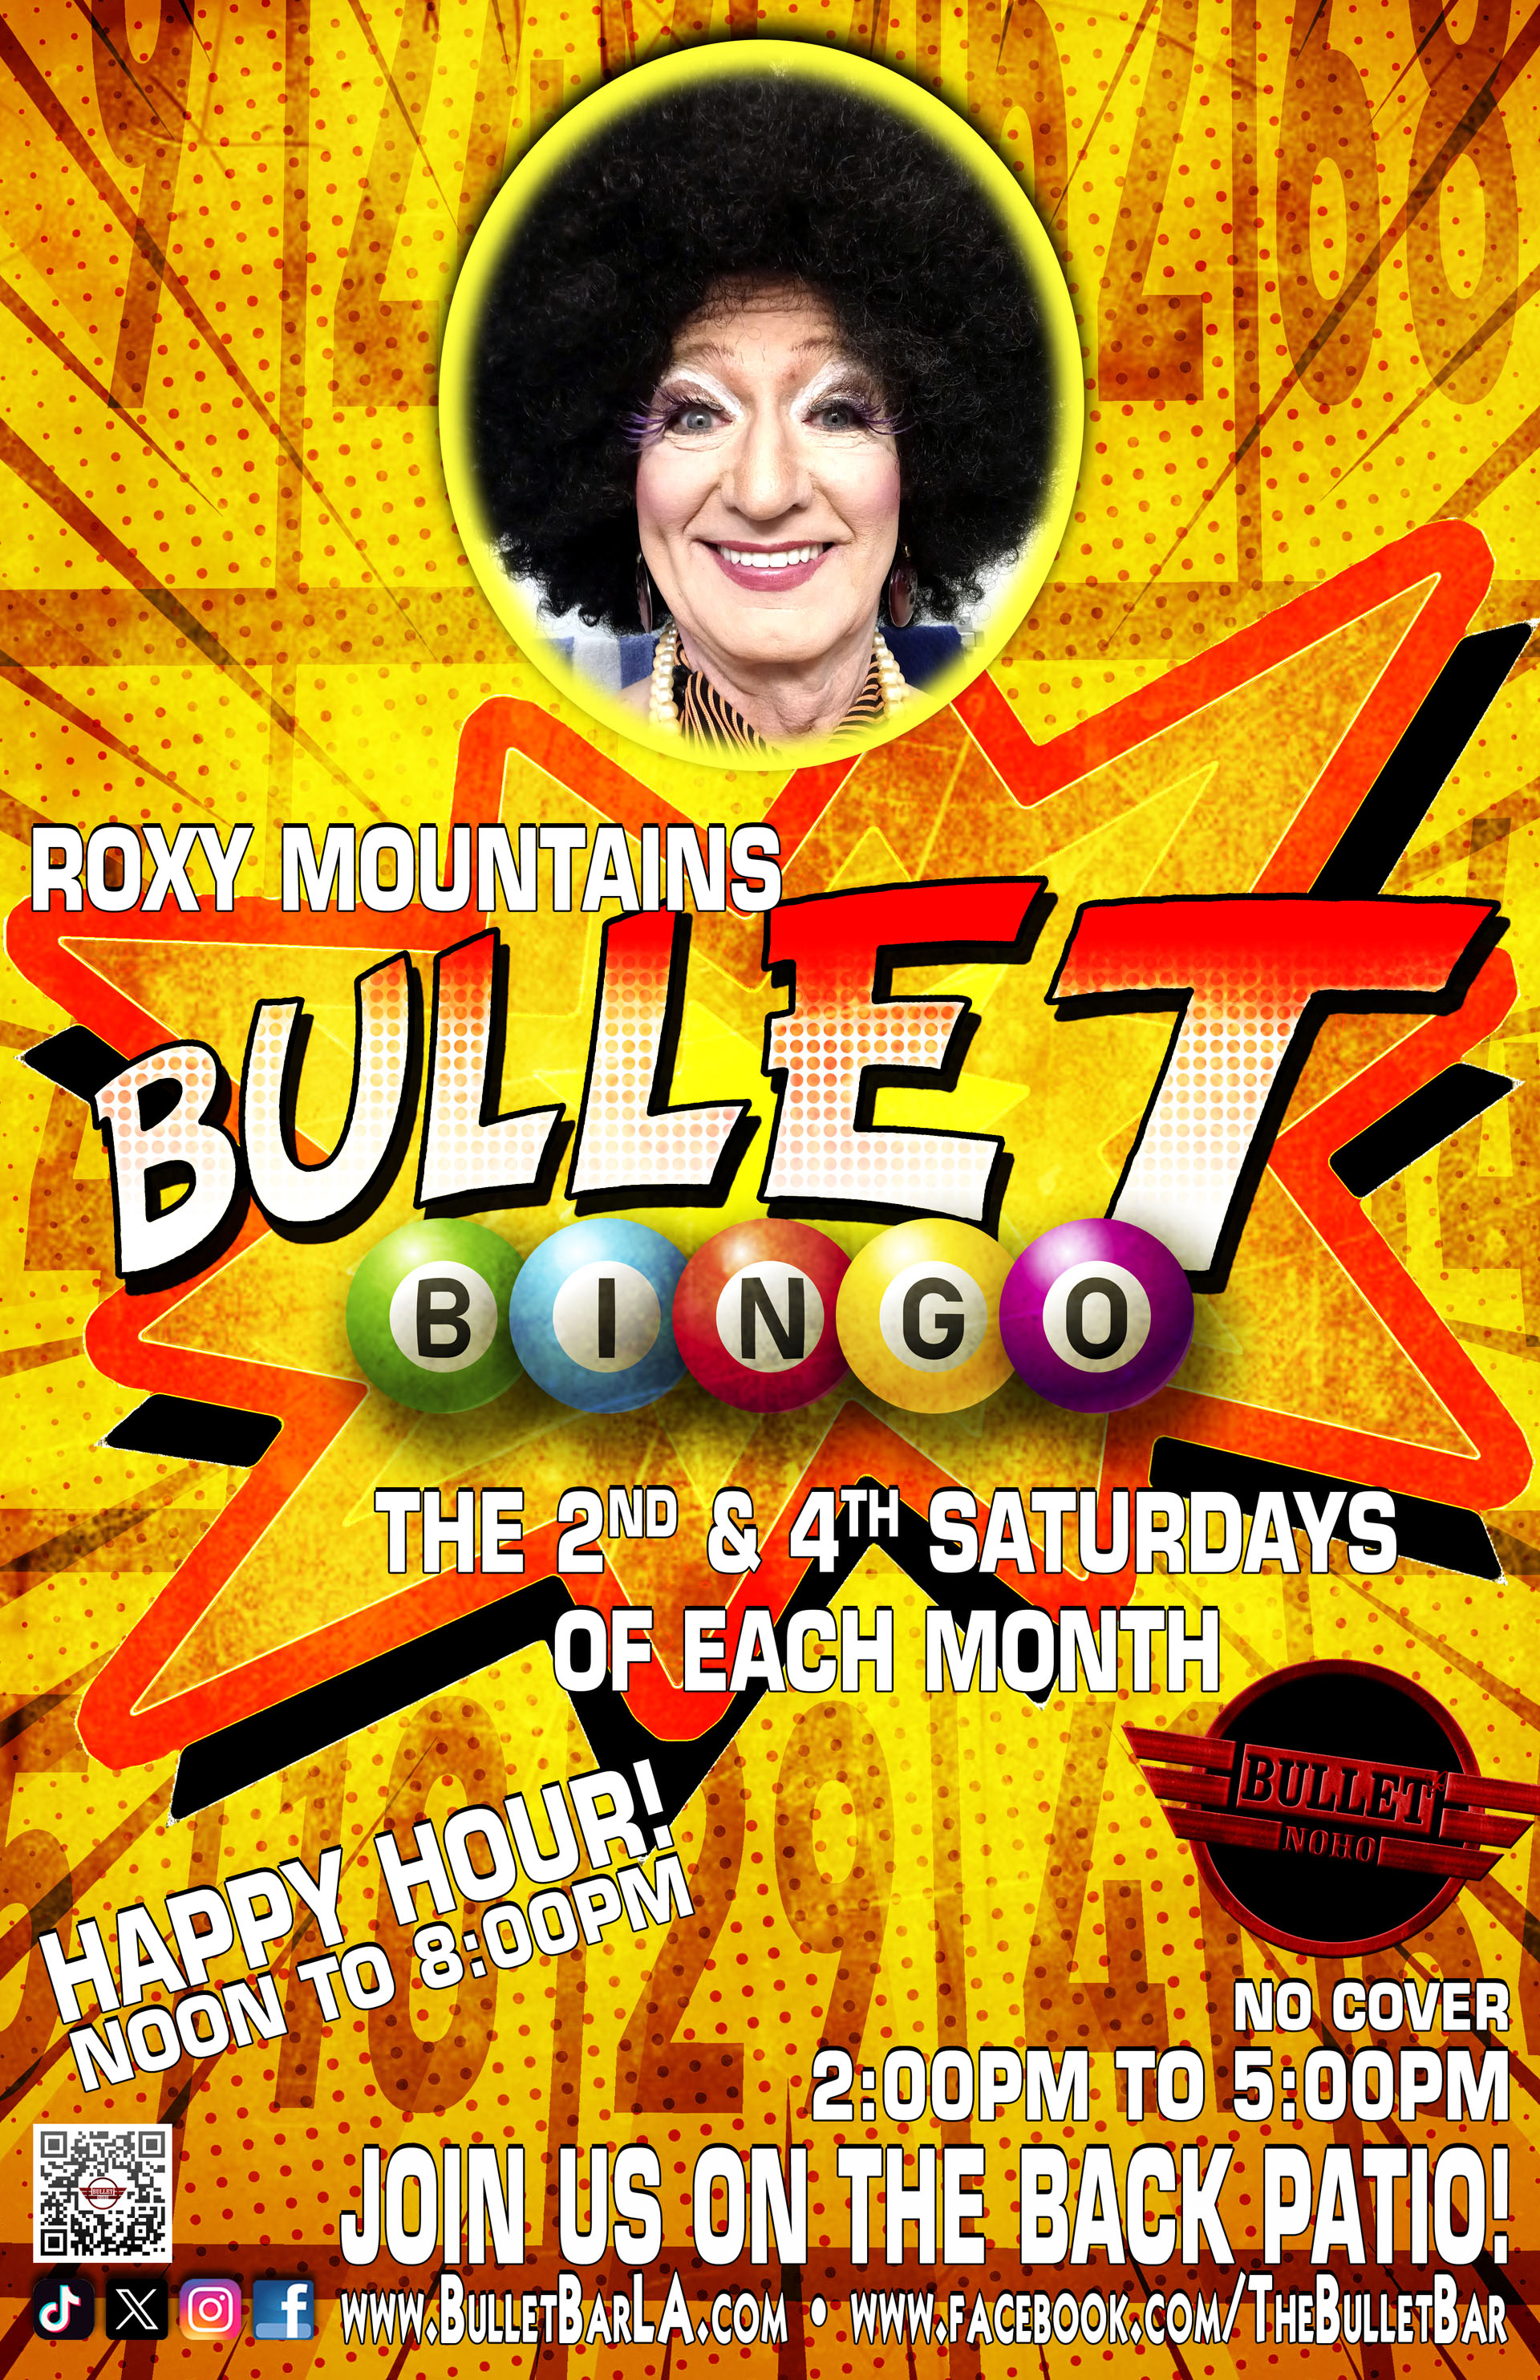 The Bullet Bar Presents BULLET BINGO with ROXY MOUNTAINS: The 2ND, 4TH (& 5TH) Saturdays of the month, 2:00 PM to 5:00 PM on our back patio! Featuring HAPPY HOUR PRICING! No cover.